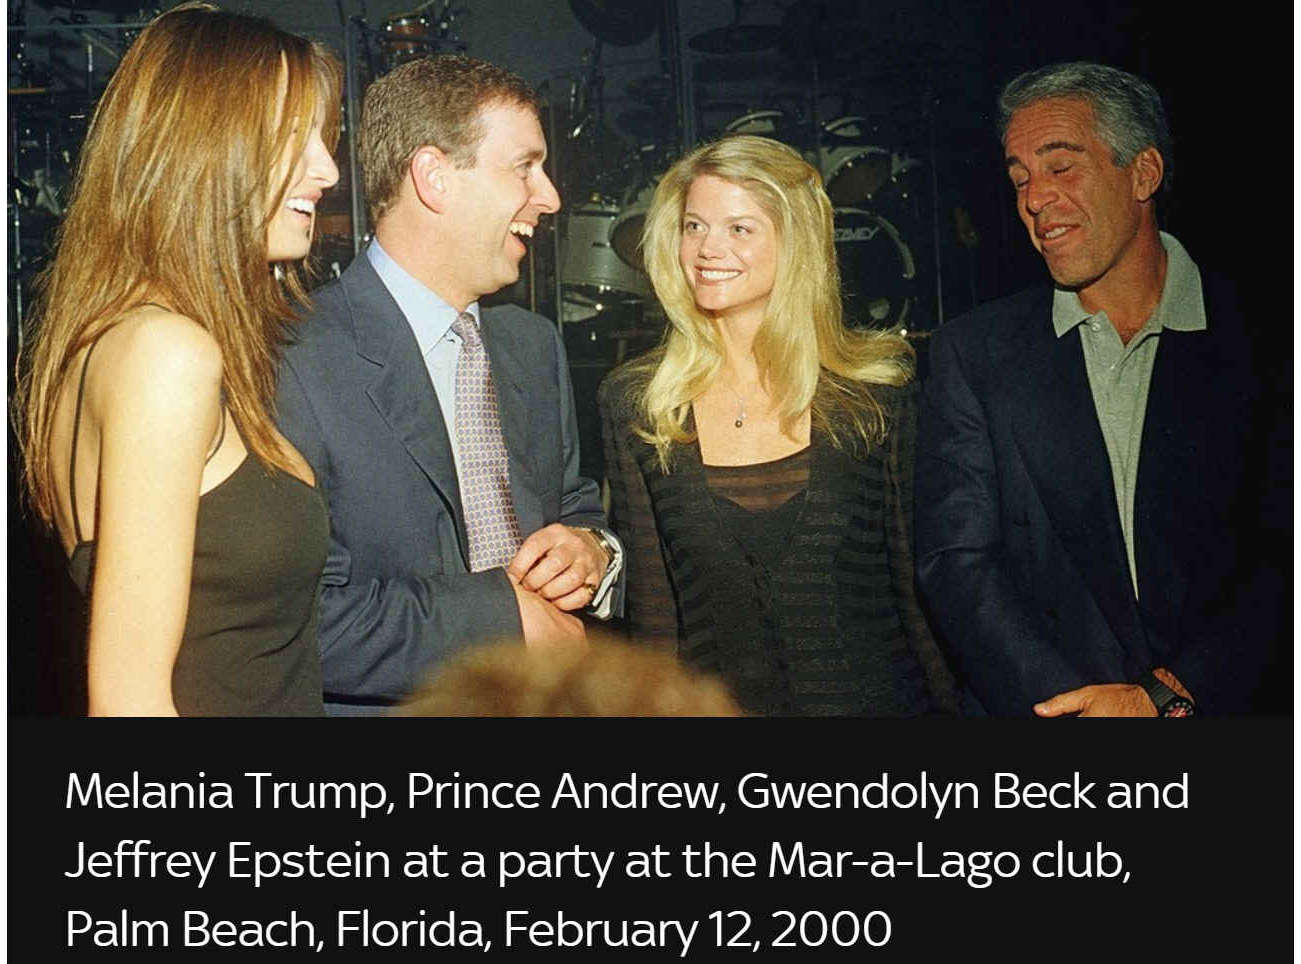 Melania Trump, Prince Andrew, Gwendolyn Beck and Jeffrey Epstein in Florida February 2000